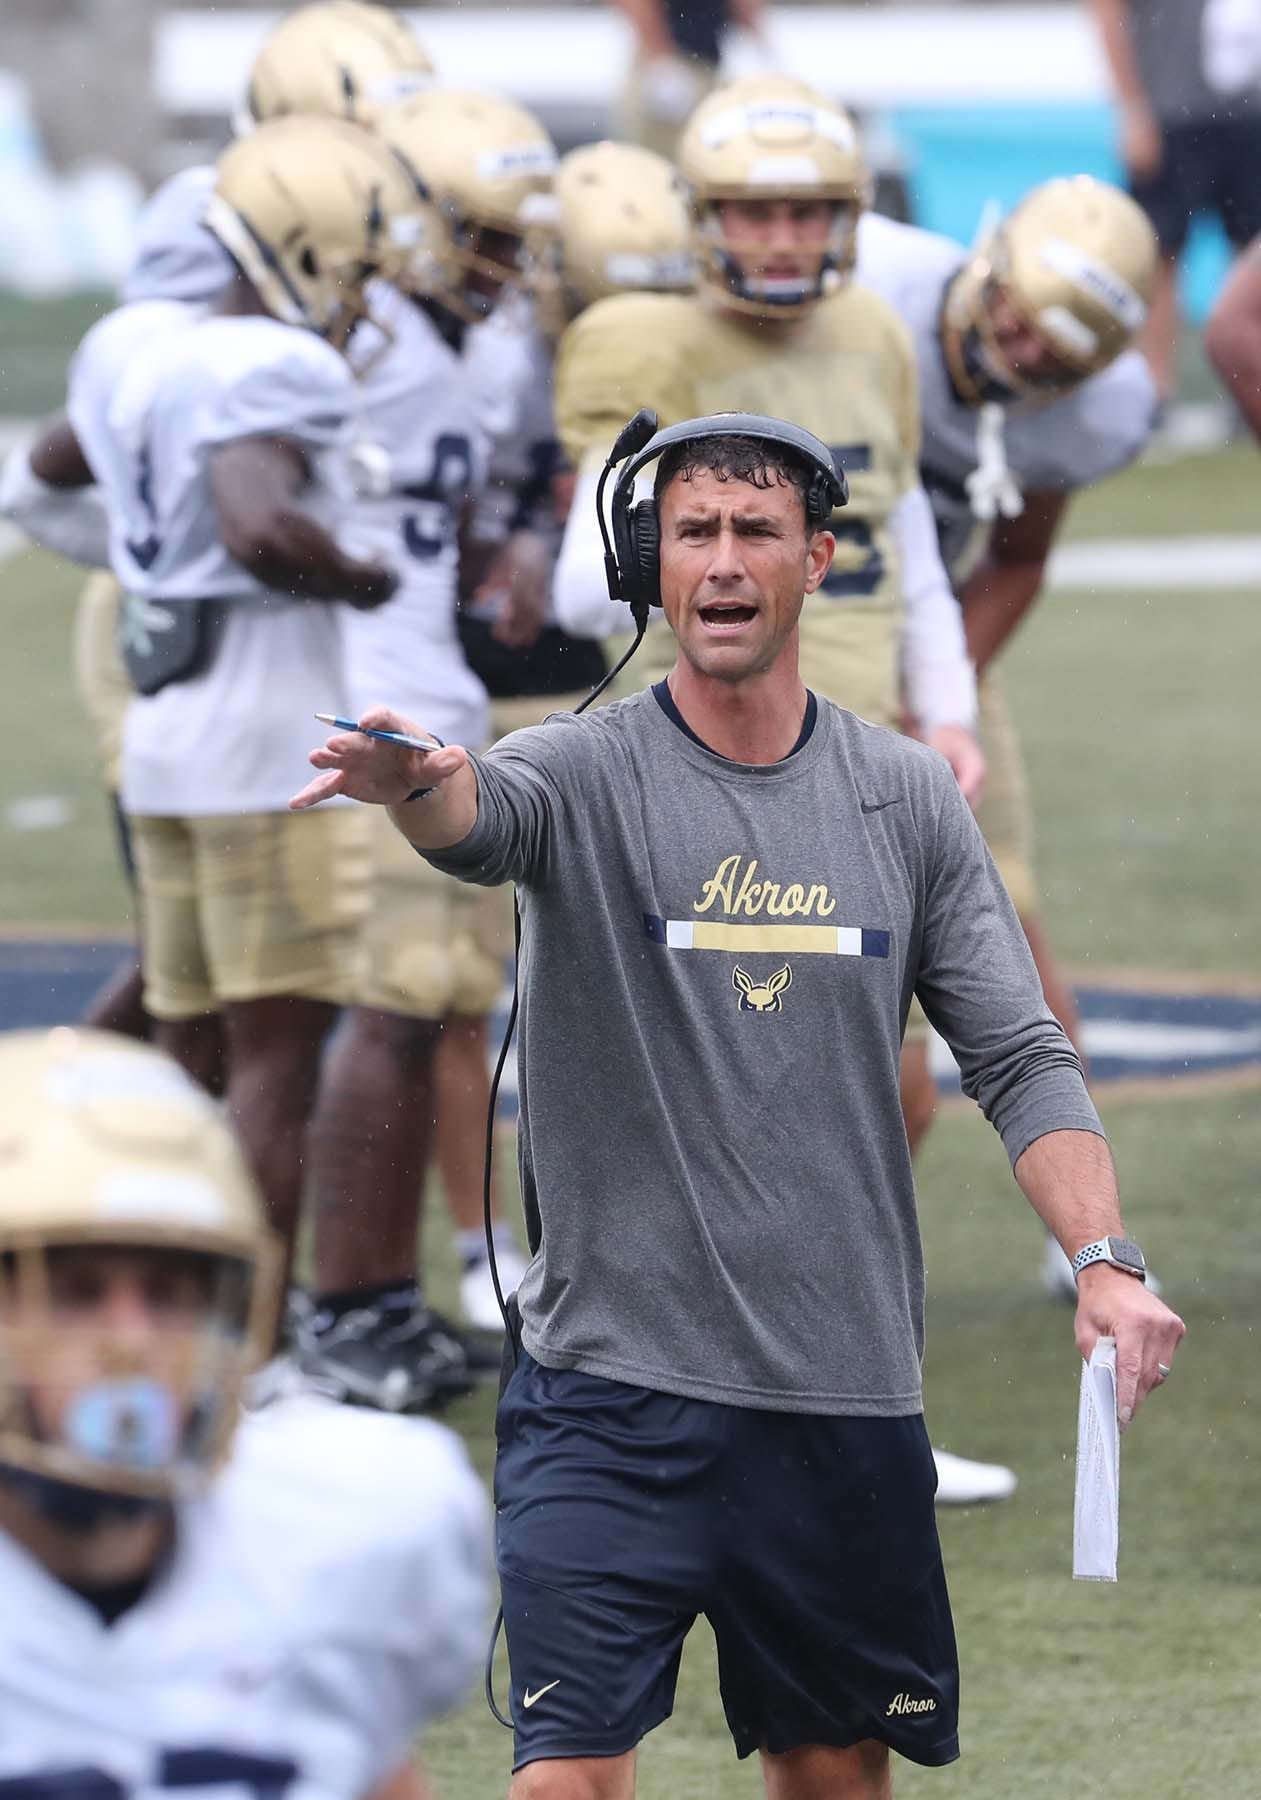 King-Sized Bits: Somehow, Akron football reaches new low